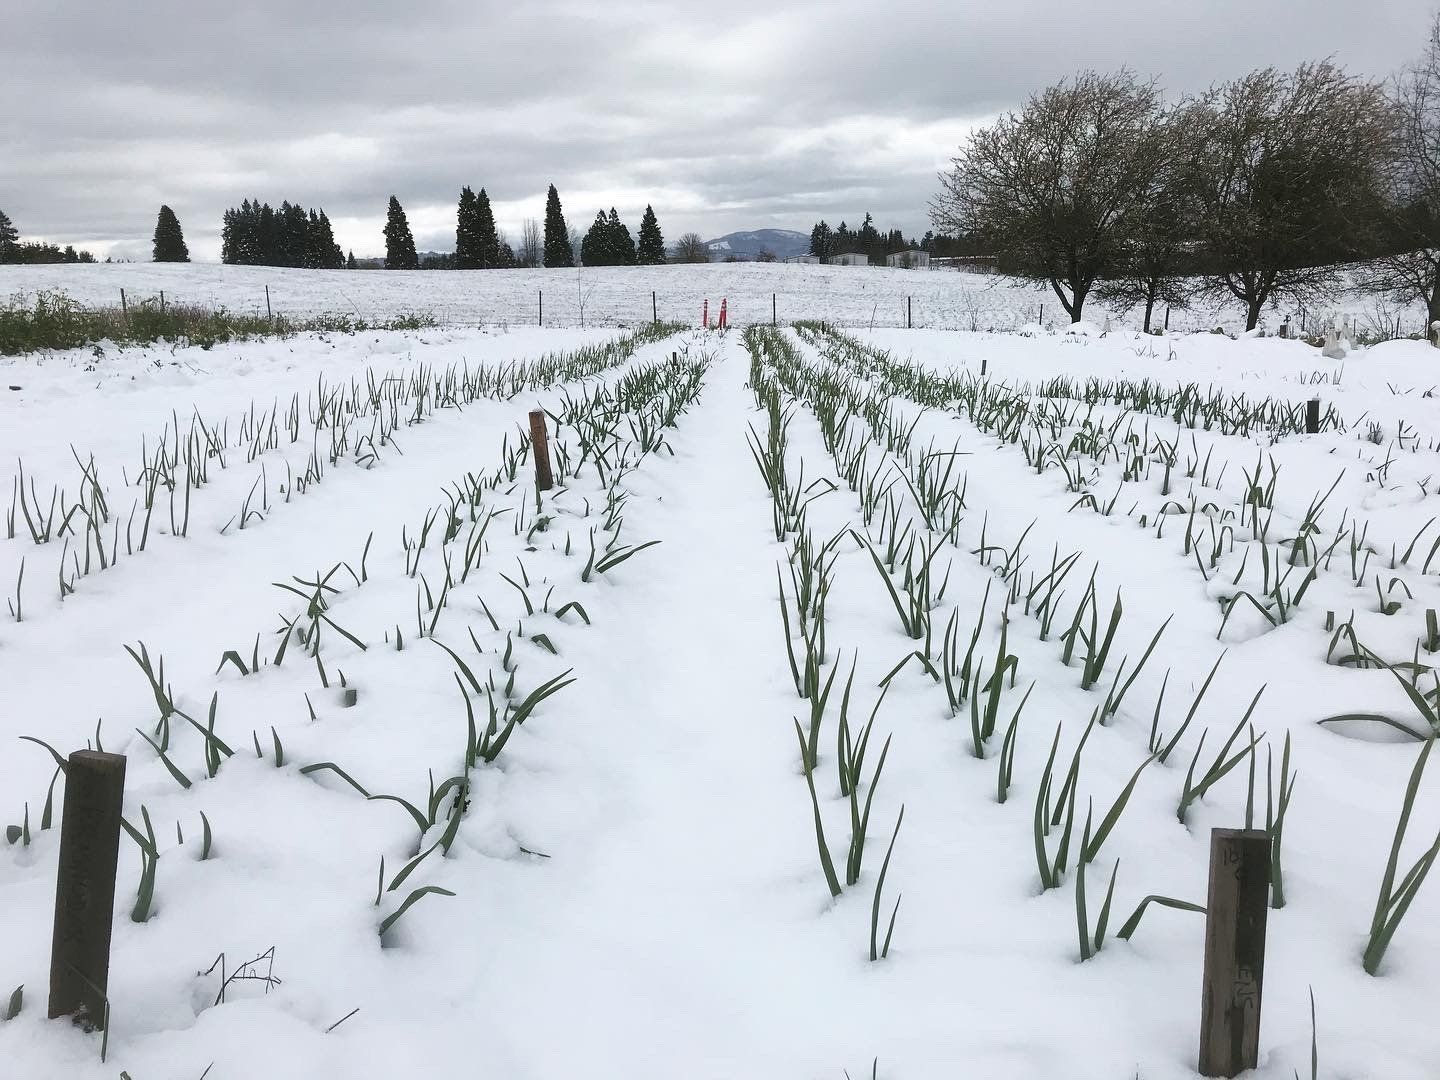 Previous Happening: Farm Happenings for March 20, 2020